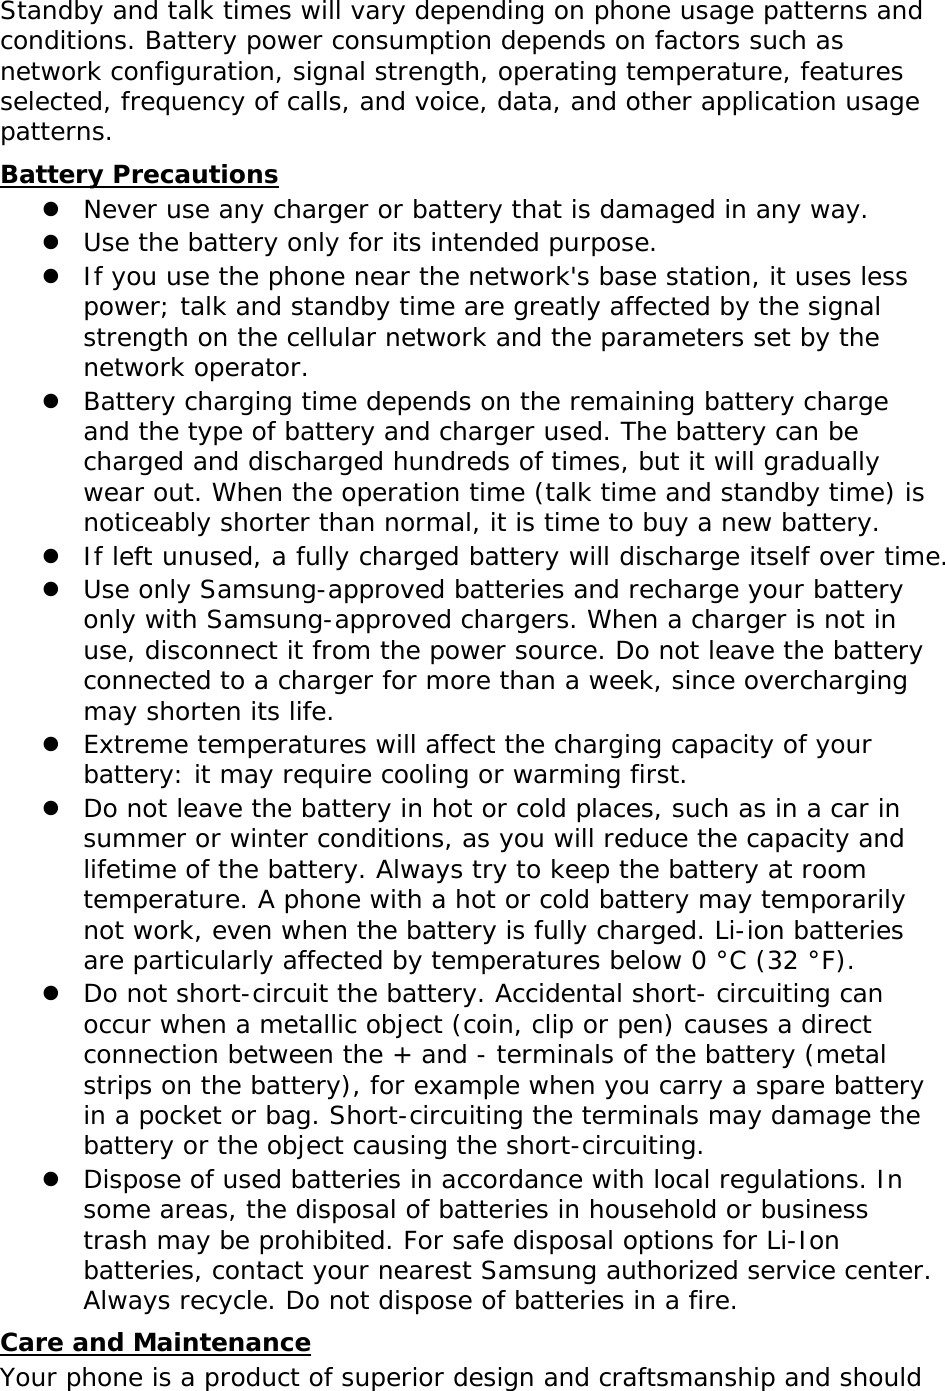 Standby and talk times will vary depending on phone usage patterns and conditions. Battery power consumption depends on factors such as network configuration, signal strength, operating temperature, features selected, frequency of calls, and voice, data, and other application usage patterns.  Battery Precautions z Never use any charger or battery that is damaged in any way. z Use the battery only for its intended purpose. z If you use the phone near the network&apos;s base station, it uses less power; talk and standby time are greatly affected by the signal strength on the cellular network and the parameters set by the network operator. z Battery charging time depends on the remaining battery charge and the type of battery and charger used. The battery can be charged and discharged hundreds of times, but it will gradually wear out. When the operation time (talk time and standby time) is noticeably shorter than normal, it is time to buy a new battery. z If left unused, a fully charged battery will discharge itself over time. z Use only Samsung-approved batteries and recharge your battery only with Samsung-approved chargers. When a charger is not in use, disconnect it from the power source. Do not leave the battery connected to a charger for more than a week, since overcharging may shorten its life. z Extreme temperatures will affect the charging capacity of your battery: it may require cooling or warming first. z Do not leave the battery in hot or cold places, such as in a car in summer or winter conditions, as you will reduce the capacity and lifetime of the battery. Always try to keep the battery at room temperature. A phone with a hot or cold battery may temporarily not work, even when the battery is fully charged. Li-ion batteries are particularly affected by temperatures below 0 °C (32 °F). z Do not short-circuit the battery. Accidental short- circuiting can occur when a metallic object (coin, clip or pen) causes a direct connection between the + and - terminals of the battery (metal strips on the battery), for example when you carry a spare battery in a pocket or bag. Short-circuiting the terminals may damage the battery or the object causing the short-circuiting. z Dispose of used batteries in accordance with local regulations. In some areas, the disposal of batteries in household or business trash may be prohibited. For safe disposal options for Li-Ion batteries, contact your nearest Samsung authorized service center. Always recycle. Do not dispose of batteries in a fire. Care and Maintenance Your phone is a product of superior design and craftsmanship and should 